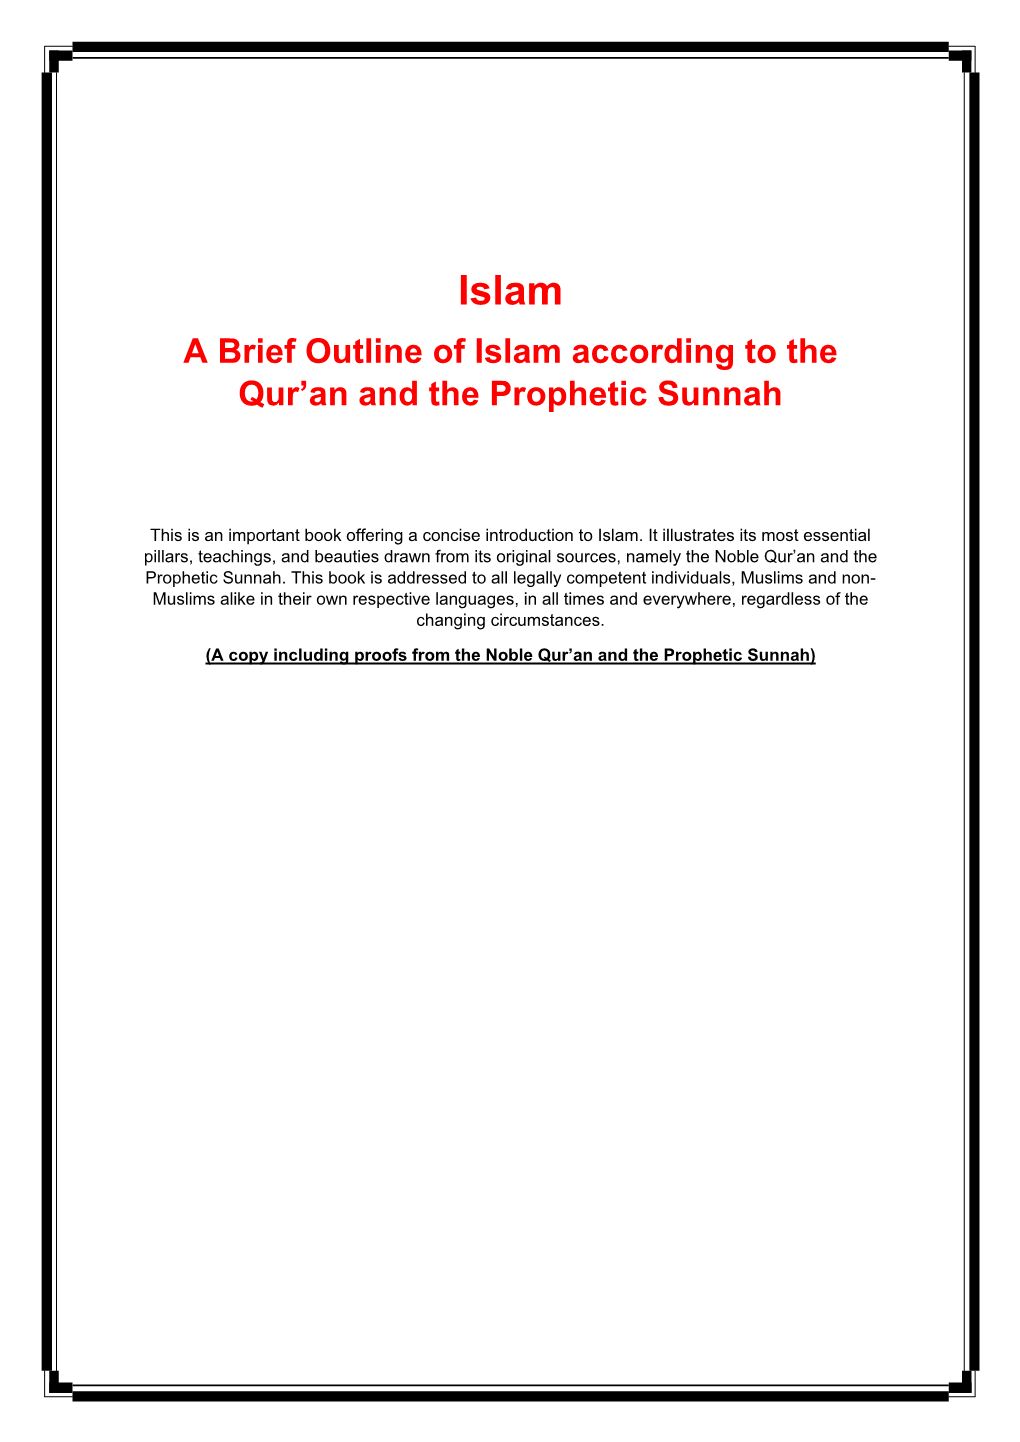 Islam a Brief Outline of Islam According to the Qur’An and the Prophetic Sunnah